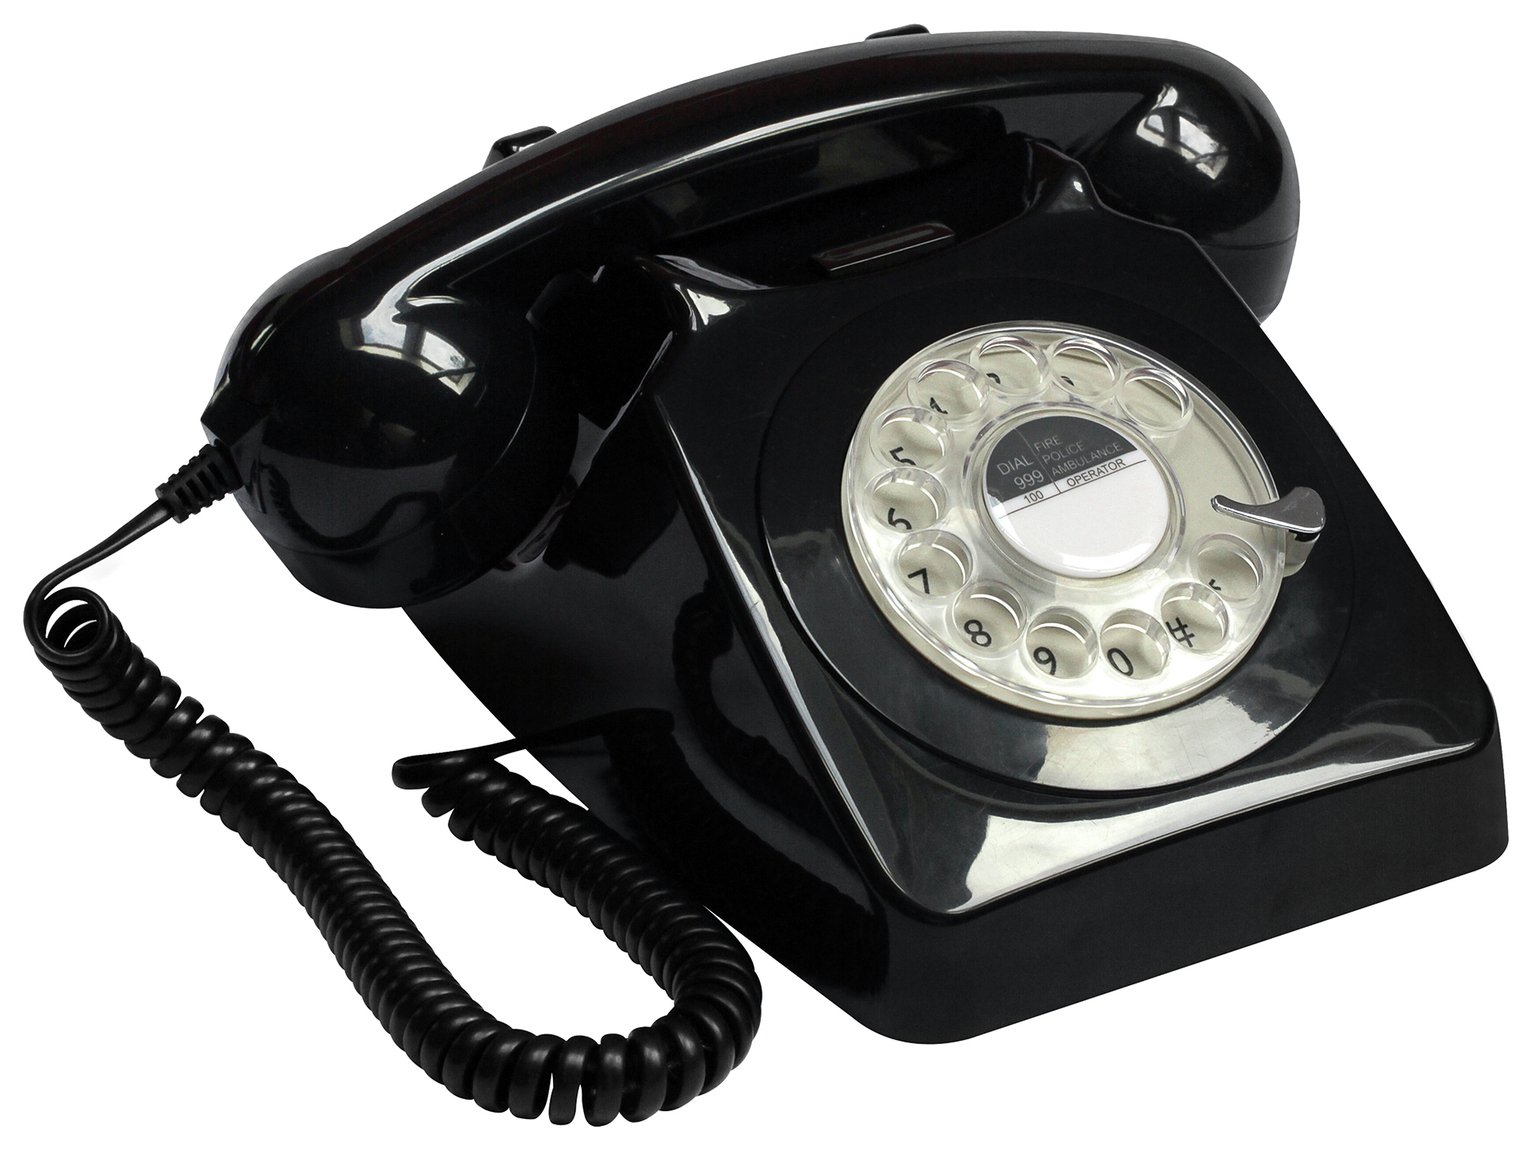 GPO 746 Rotary Dial Corded Telephone - Black